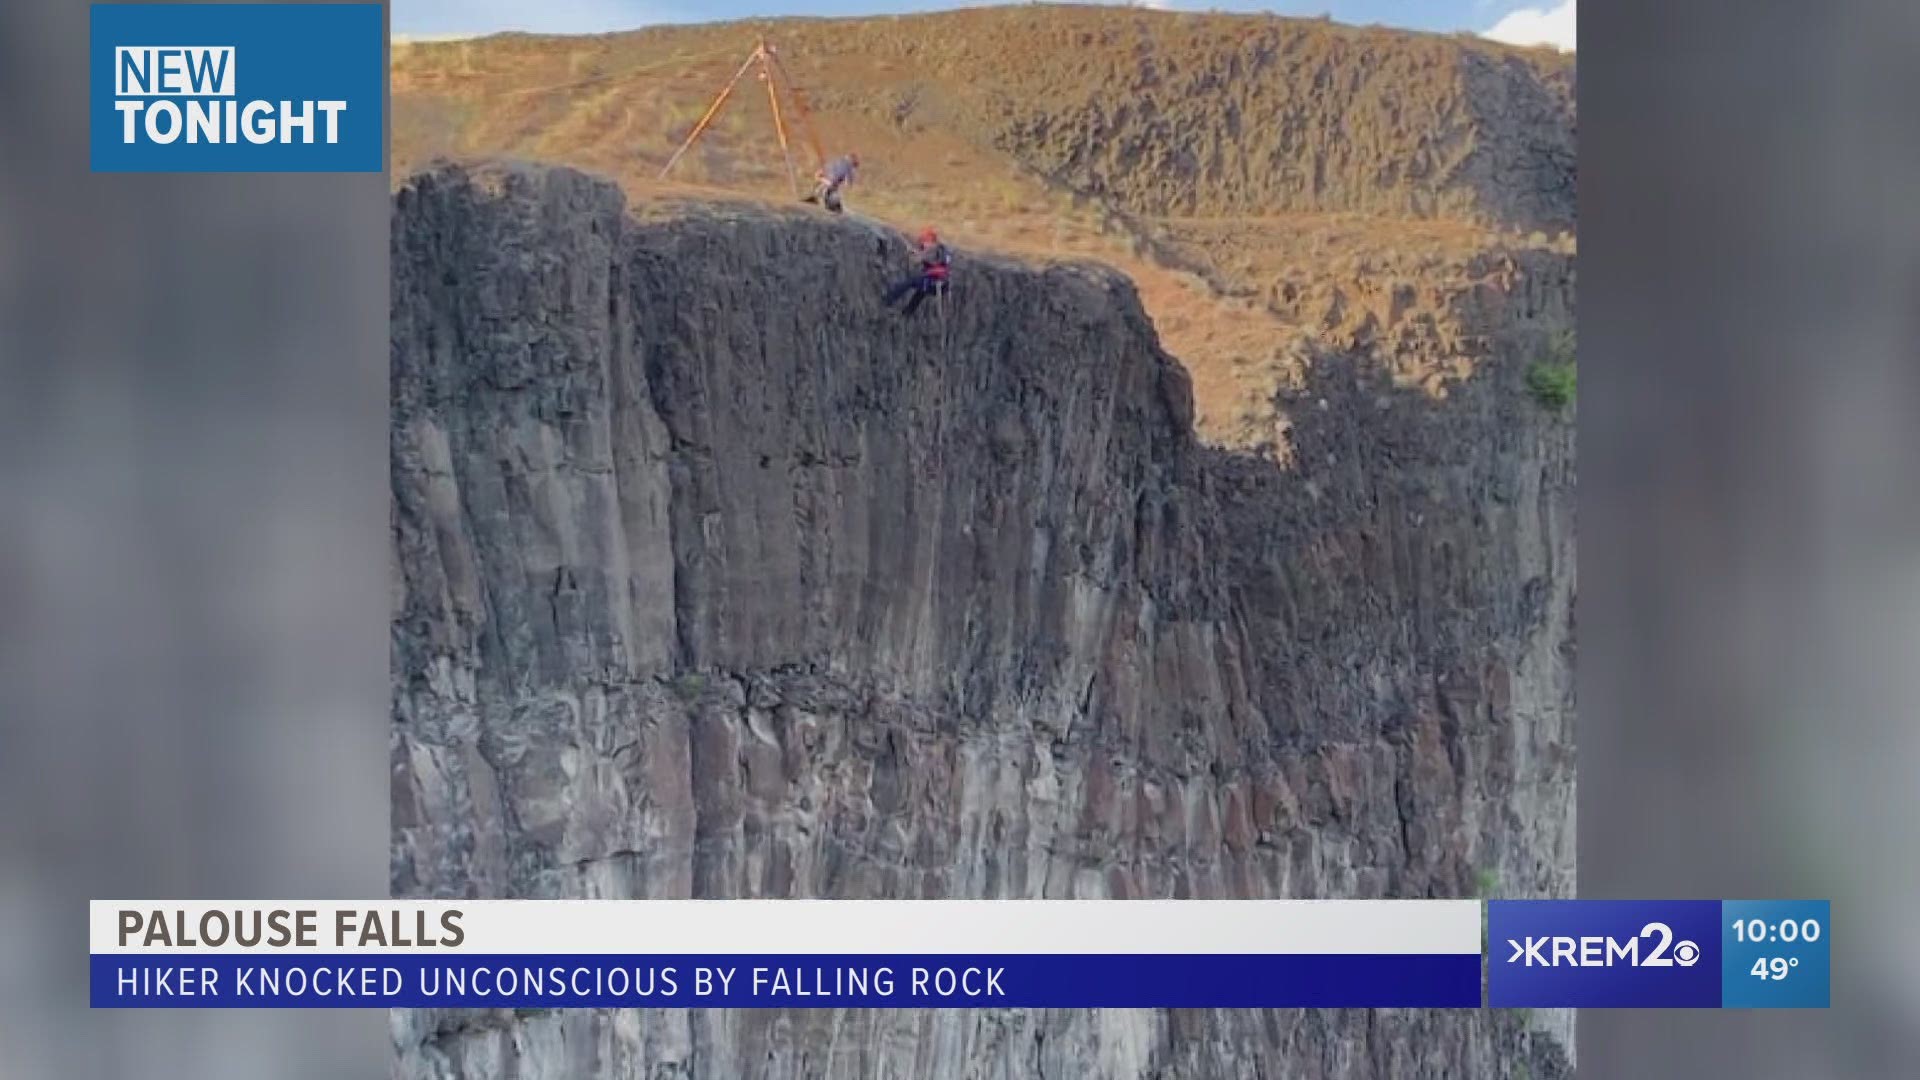 The 28-year-old man and his wife were hiking at Palouse Falls on Tuesday afternoon when a rock dislodged from above him, authorities said.